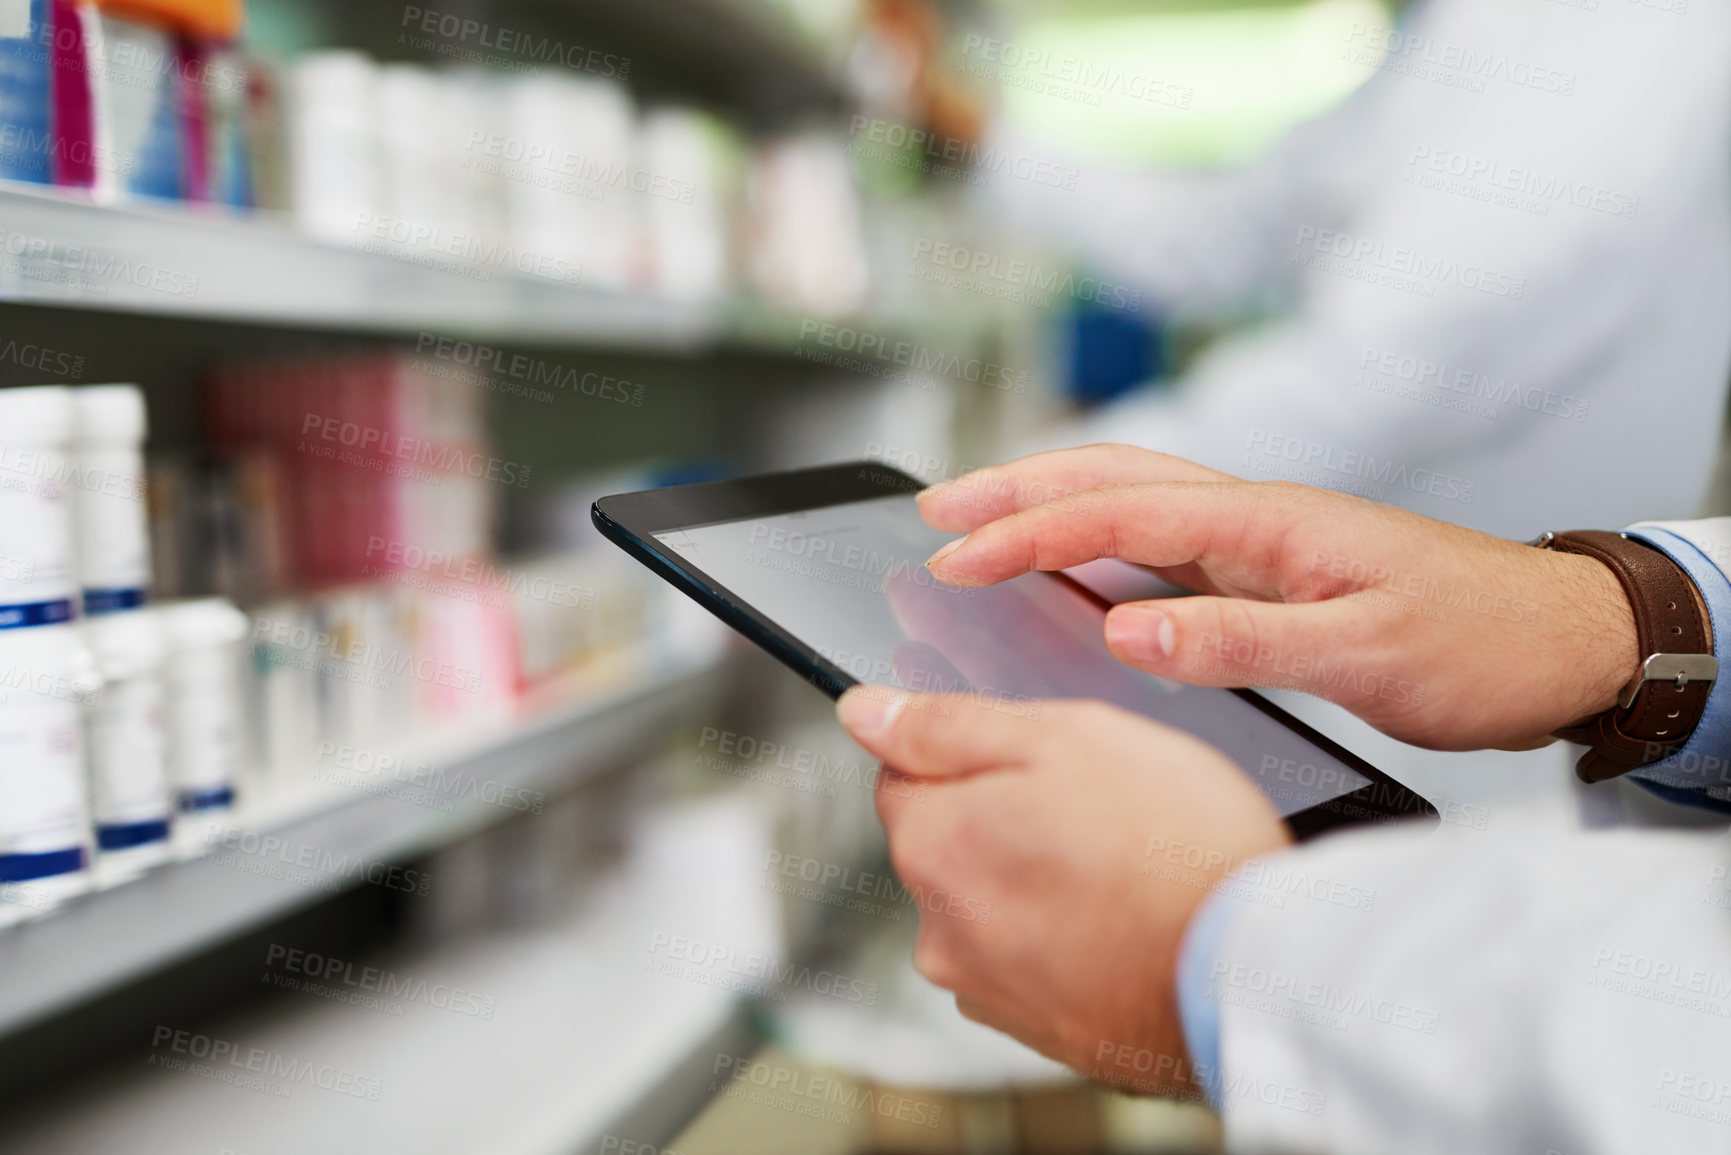 Buy stock photo Cropped shot of a pharmacist using a digital tablet in a pharmacy